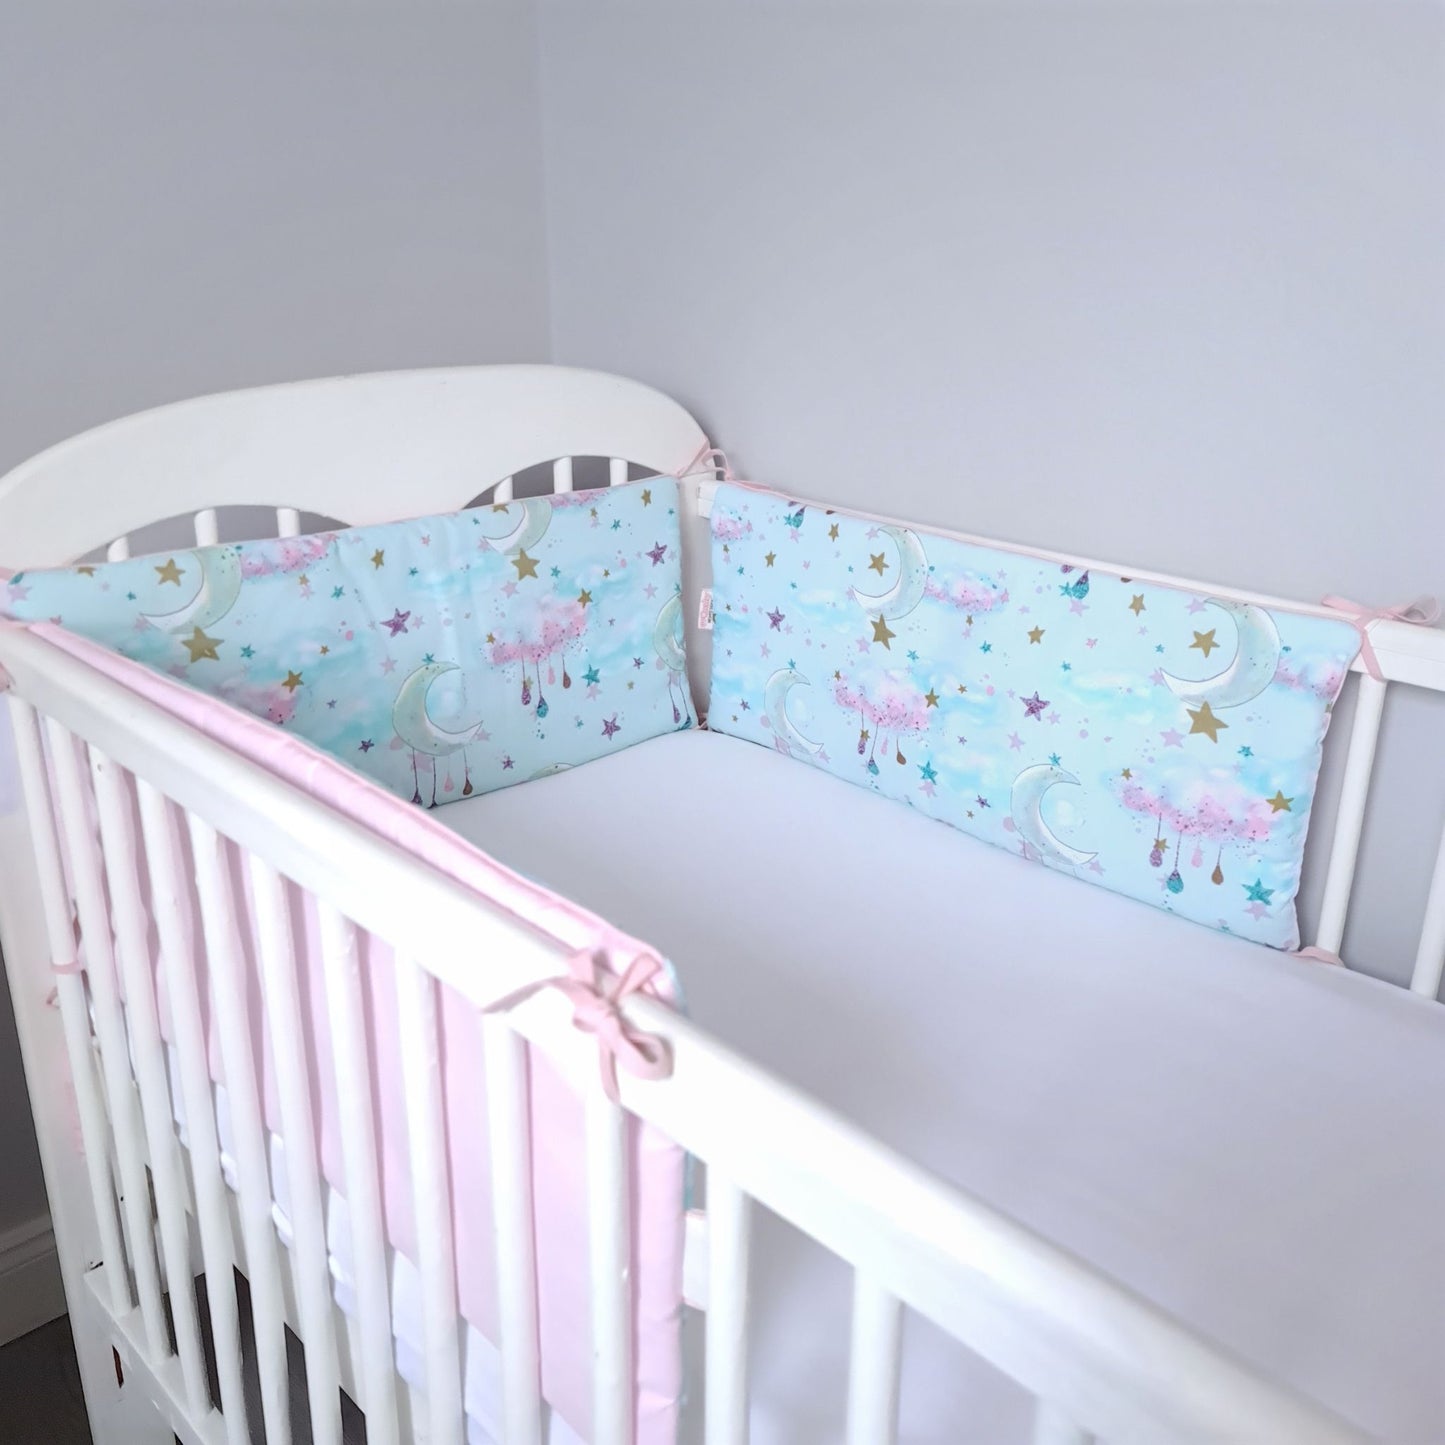 baby cot bumper protectors for cot bed pink and mint moons clouds